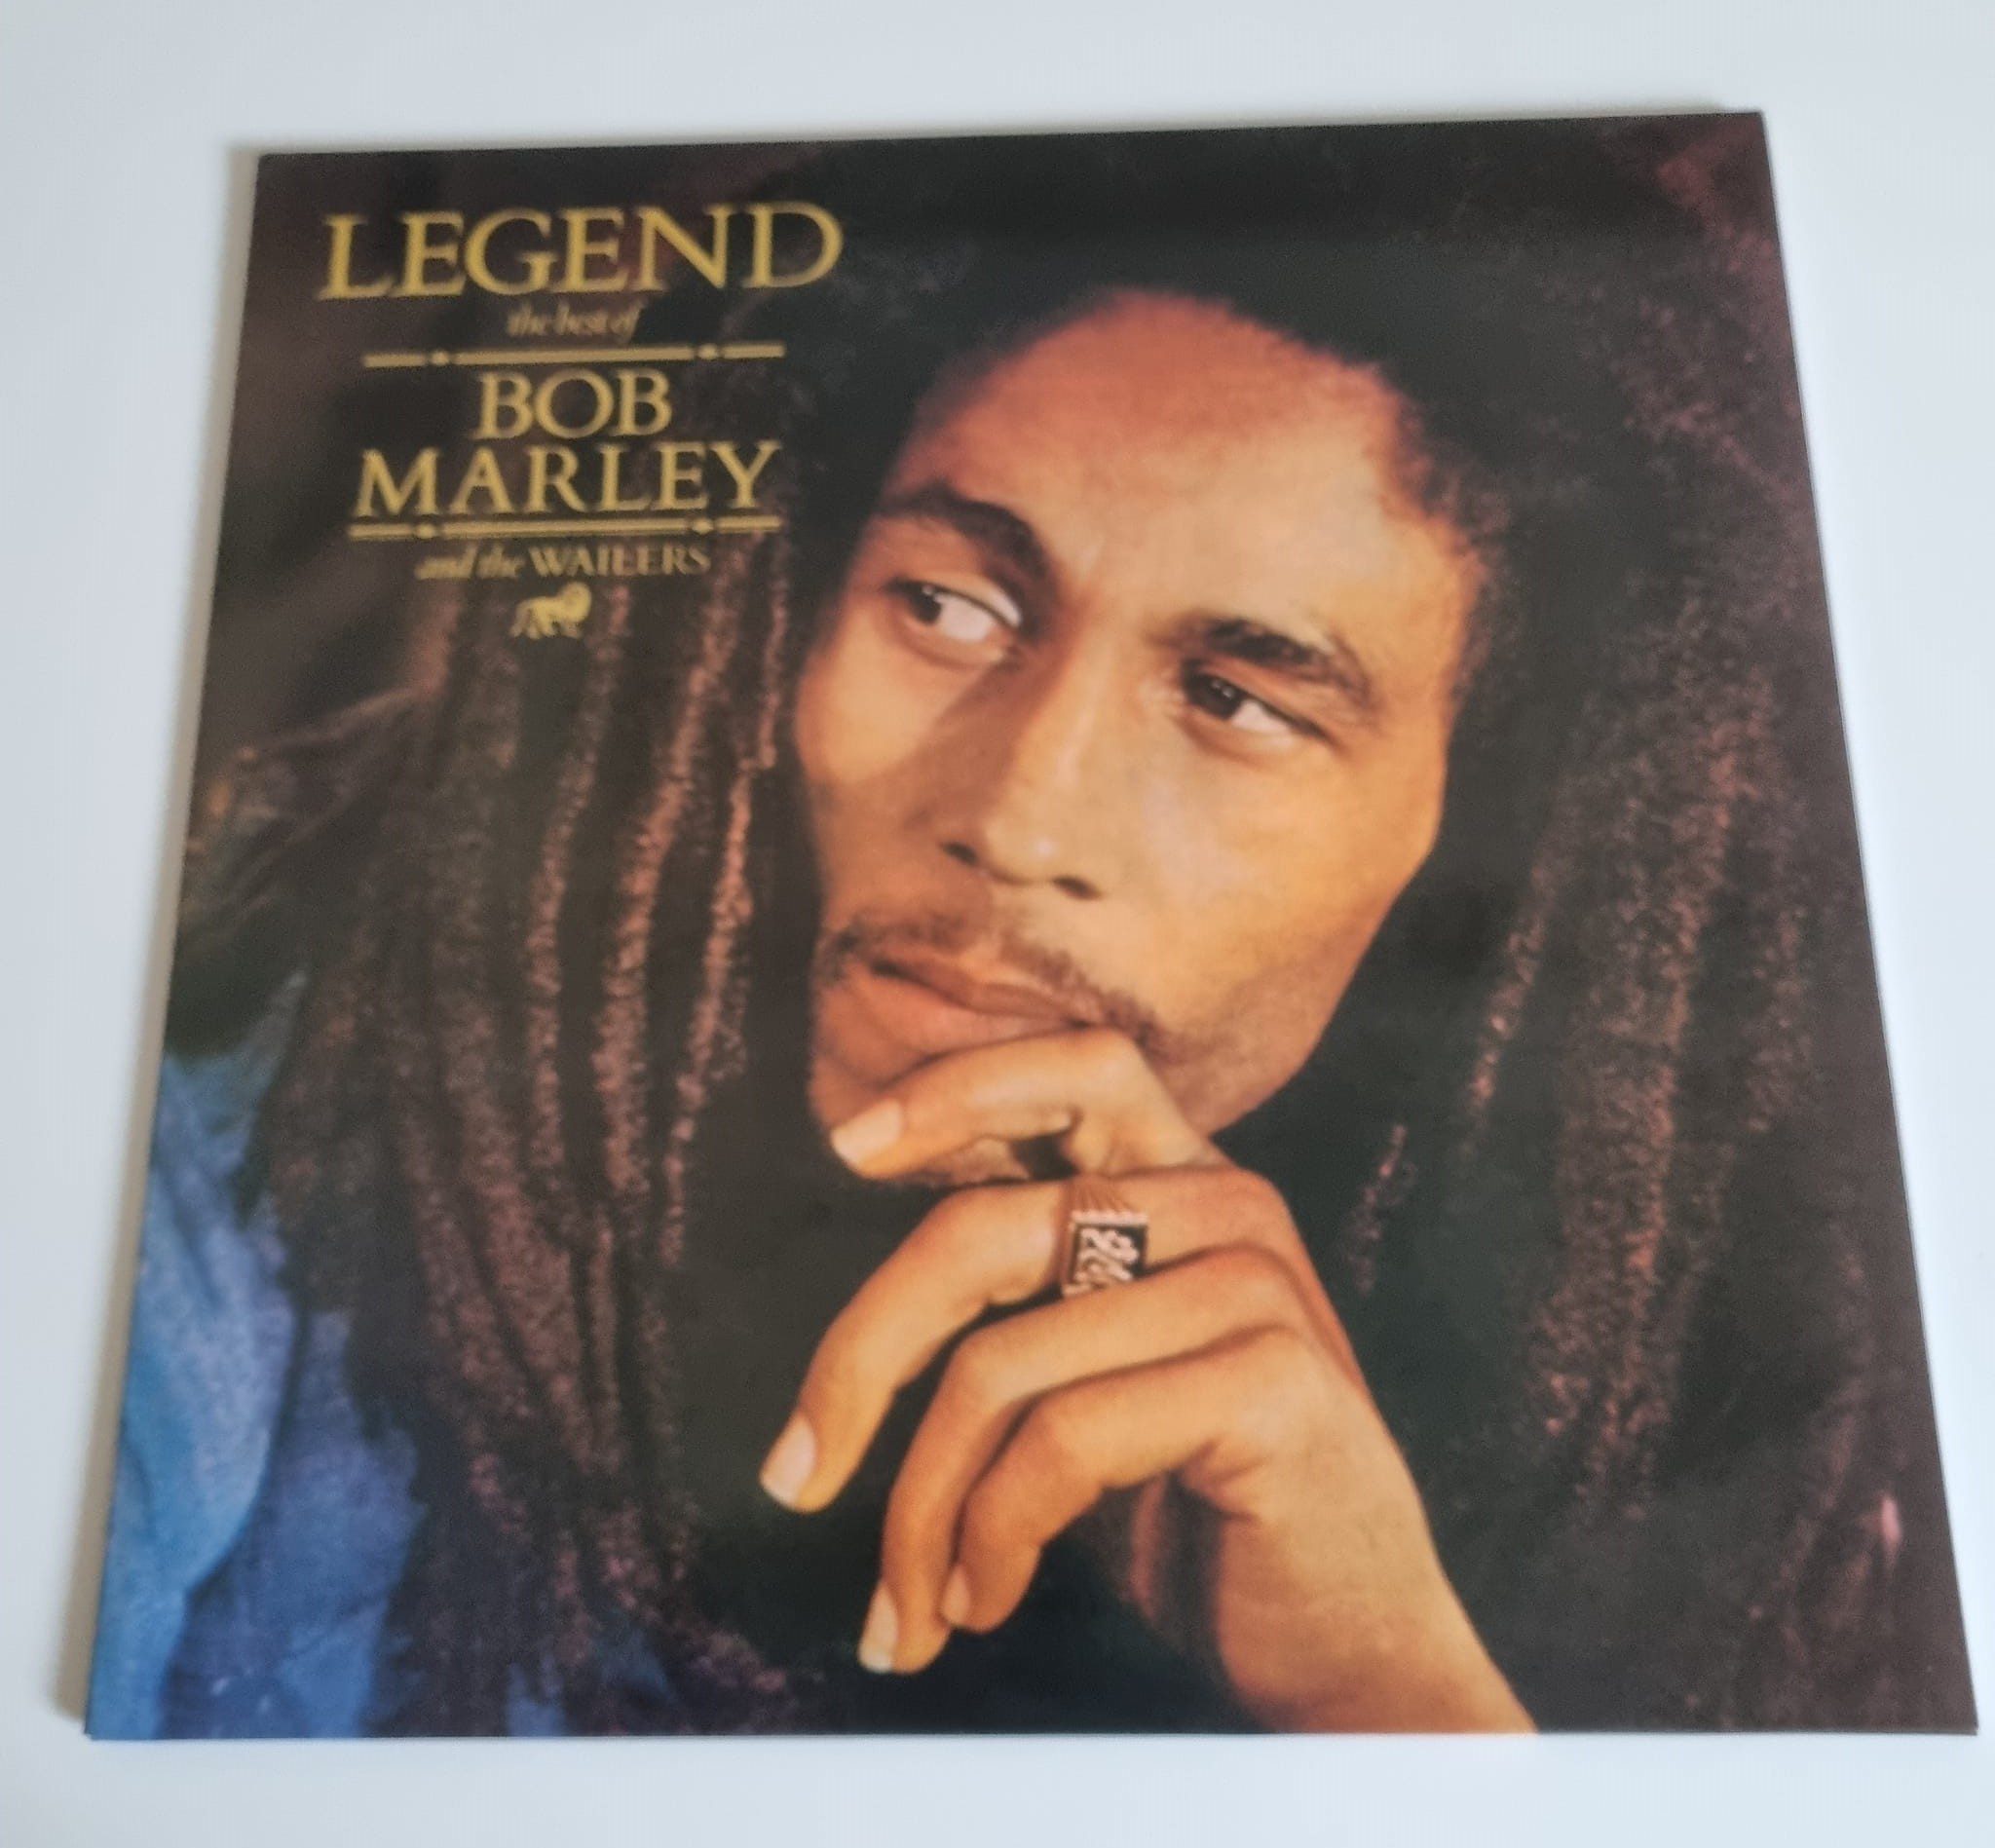 Buy this rare Bob Marley record by clicking here